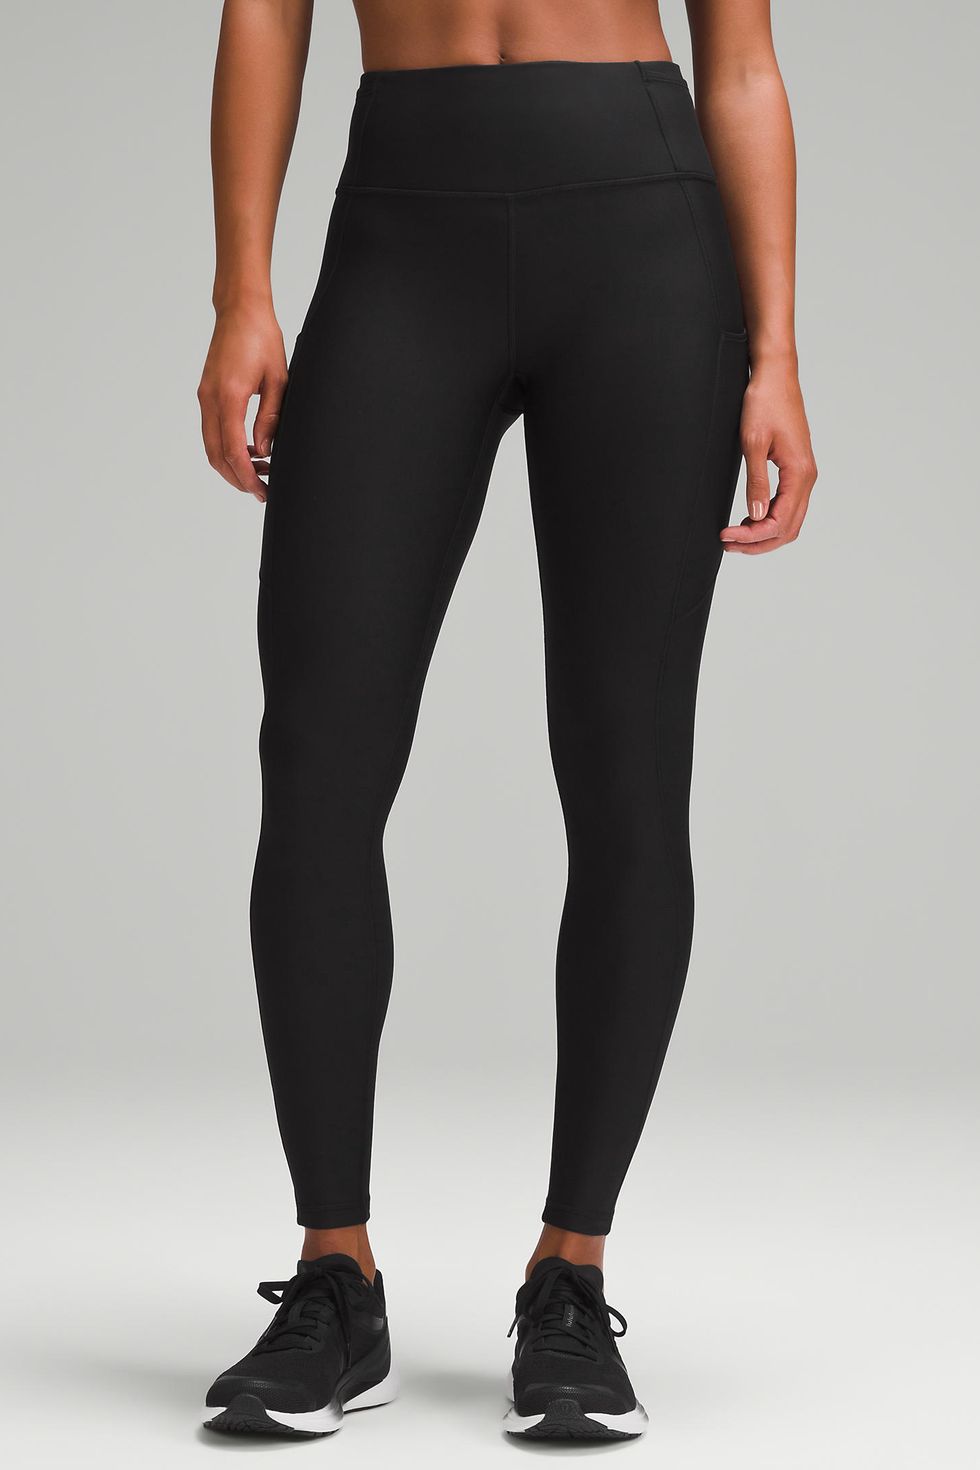 Buy Black Fleece Lined Thermal Tights from Next Hungary